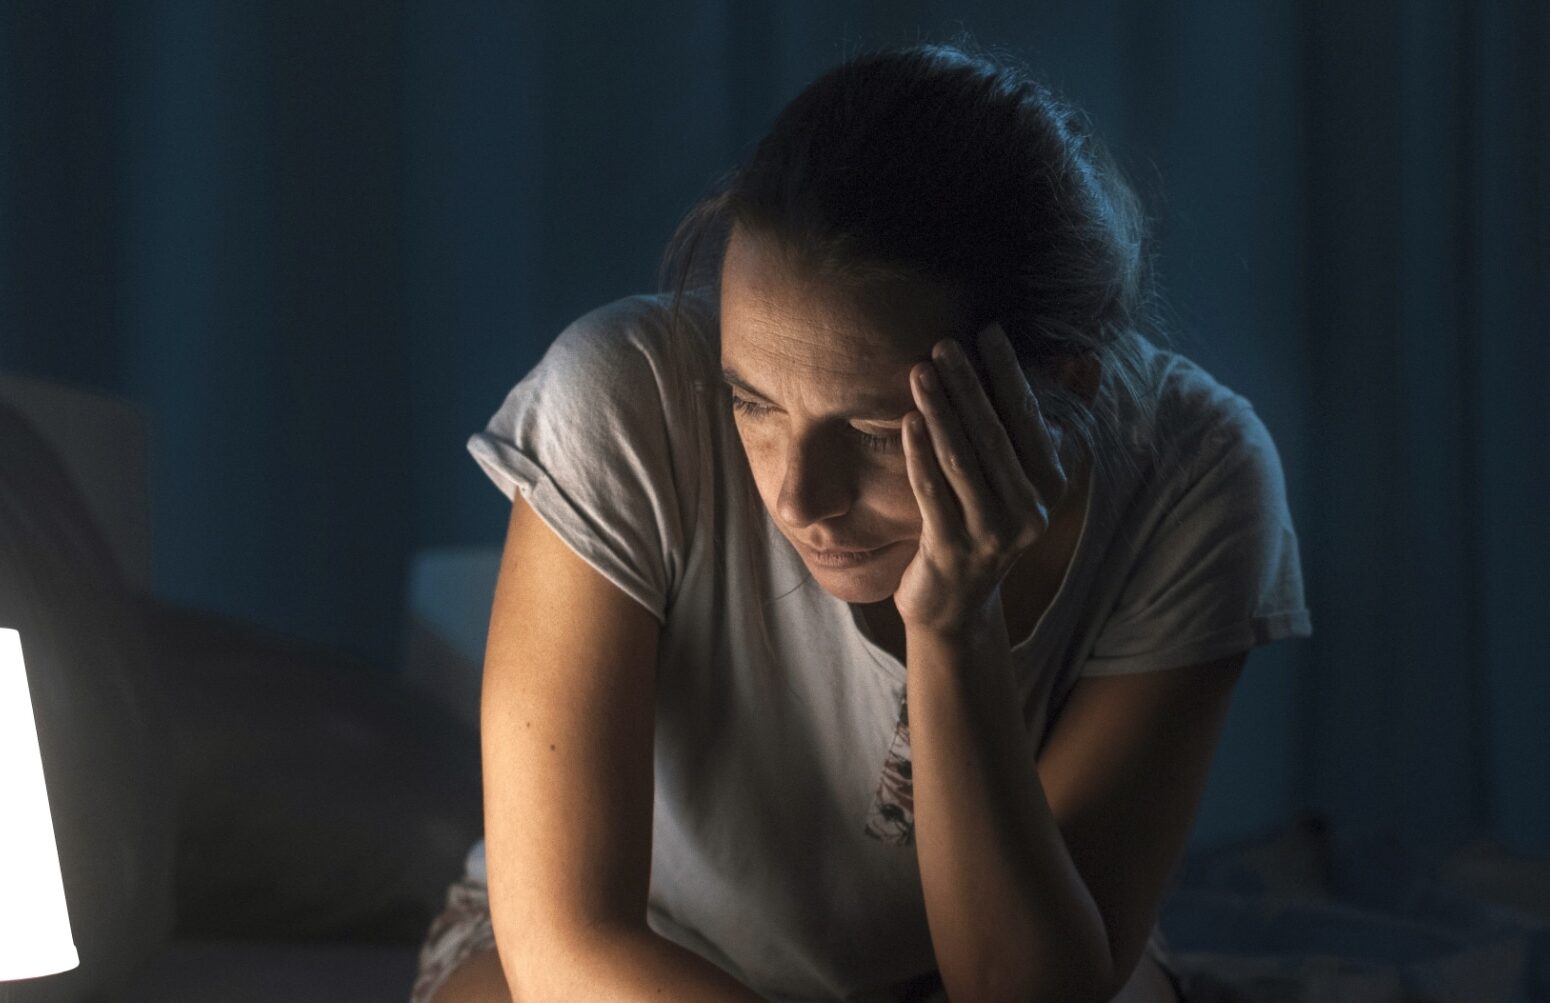 A woman sitting in a darkened room with her head in her hand.